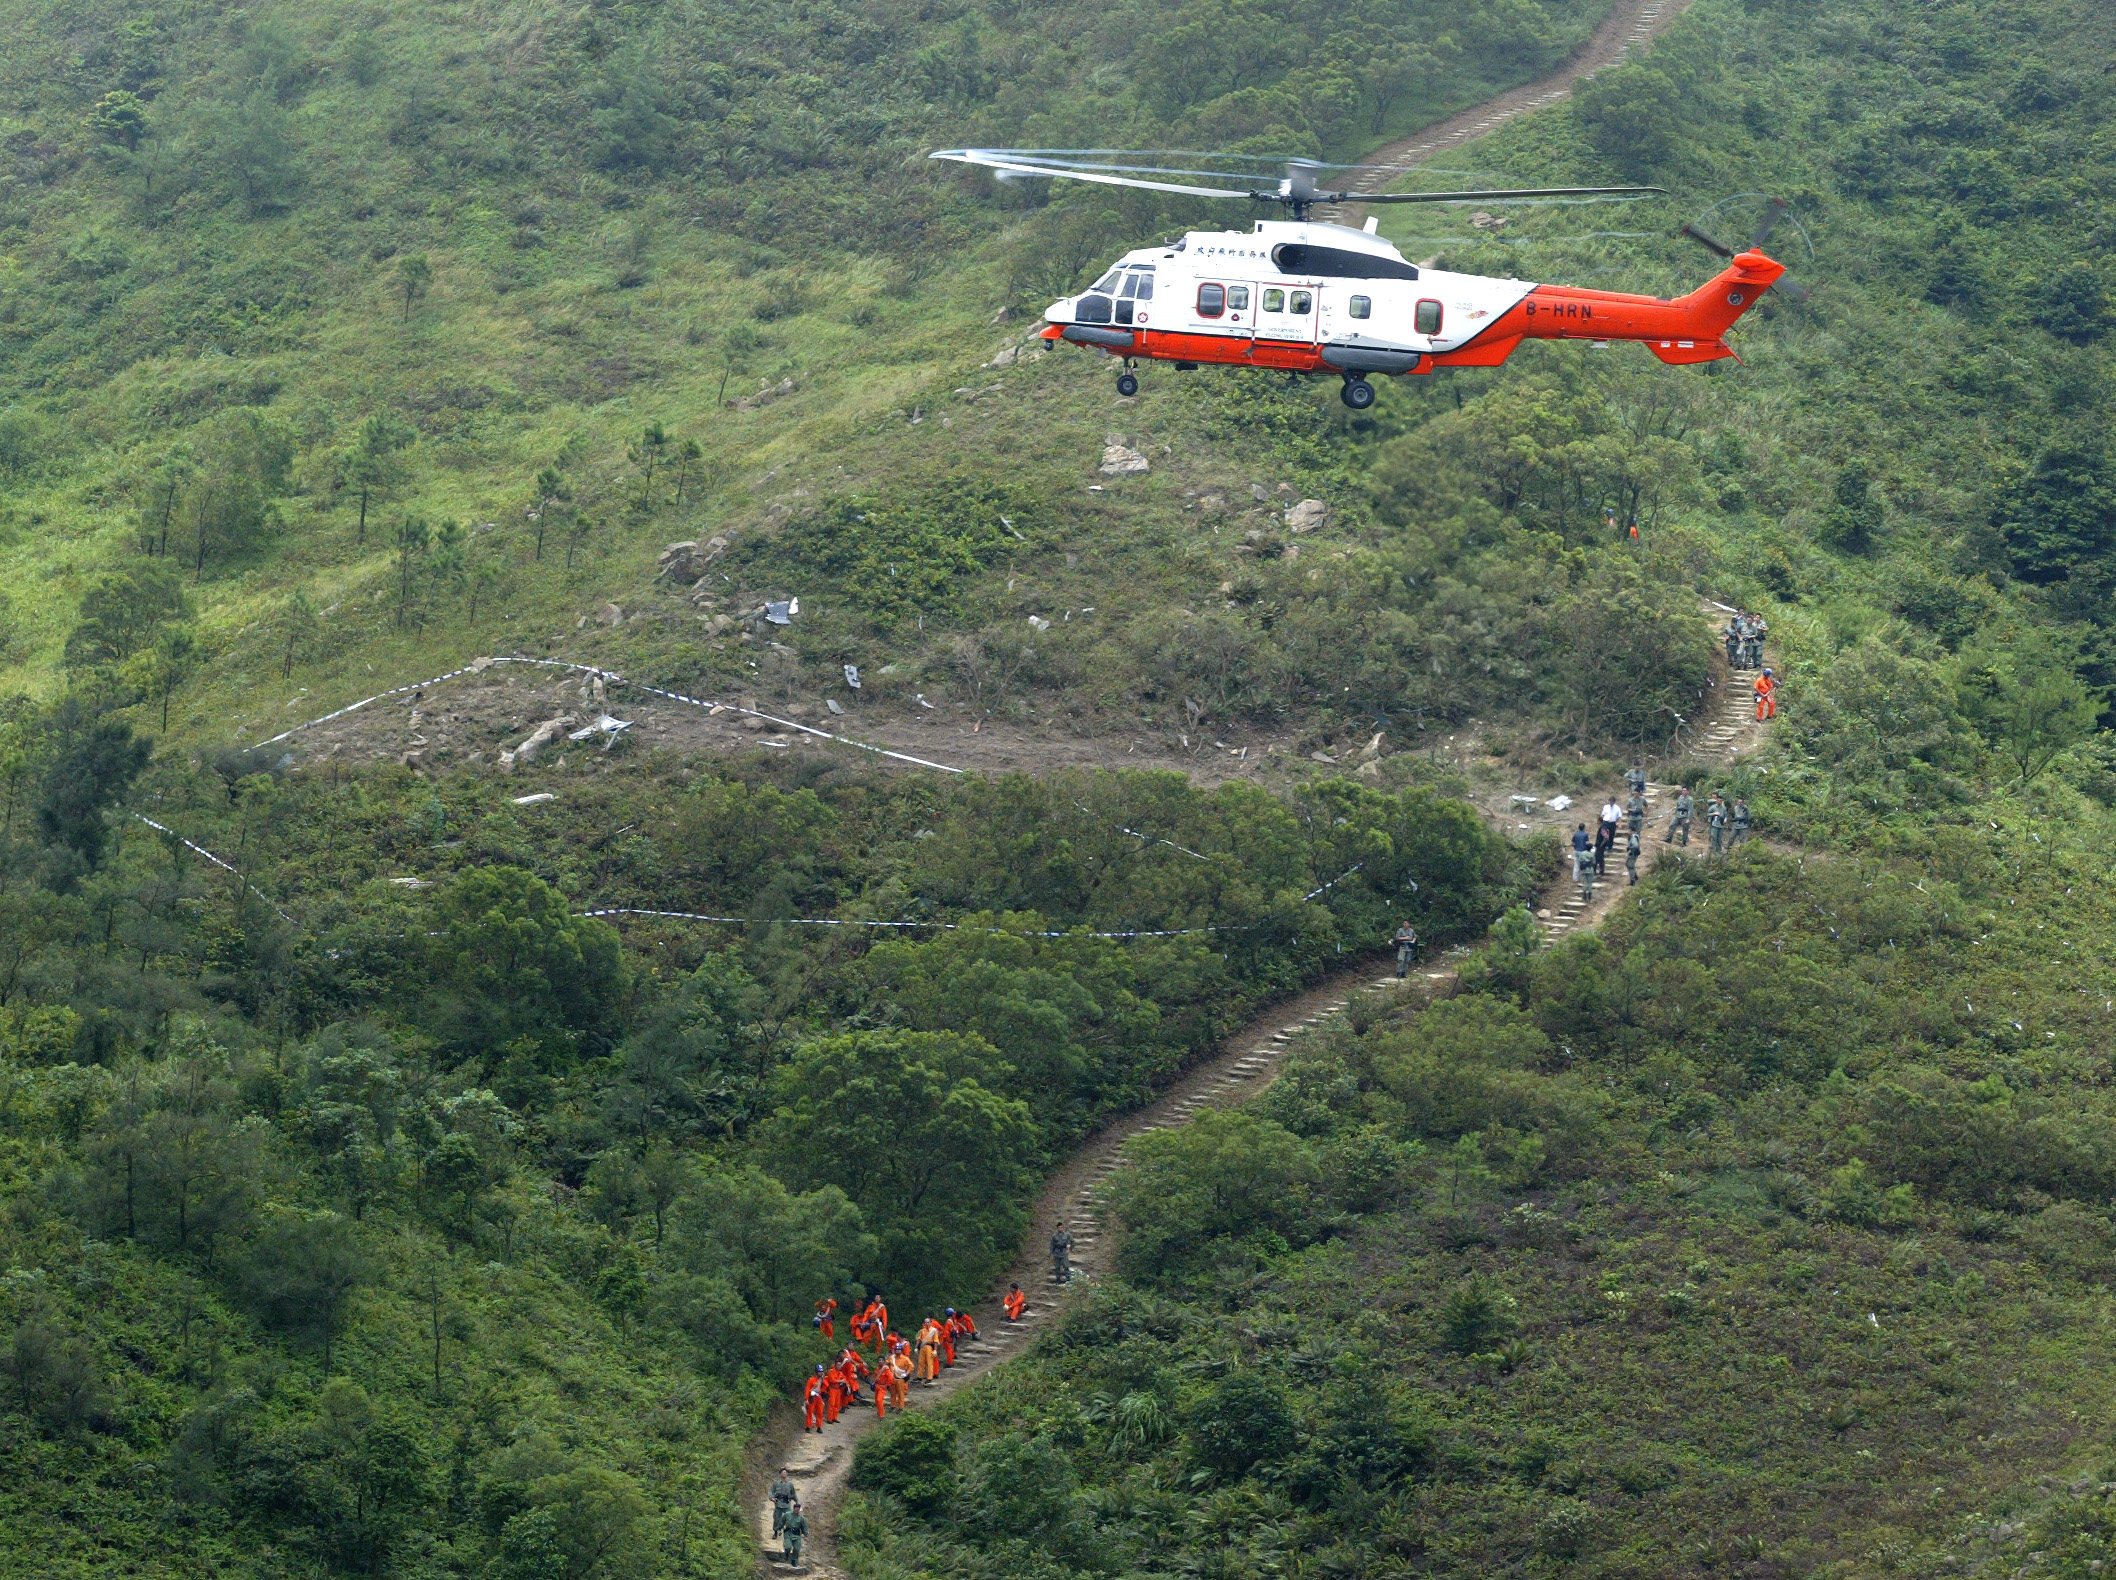 A Government Flying Service helicopter hovers over the site on Lantau Island, Hong Kong, where another GFS helicopter crashed in 2003, killing both crew. Photo: SCMP